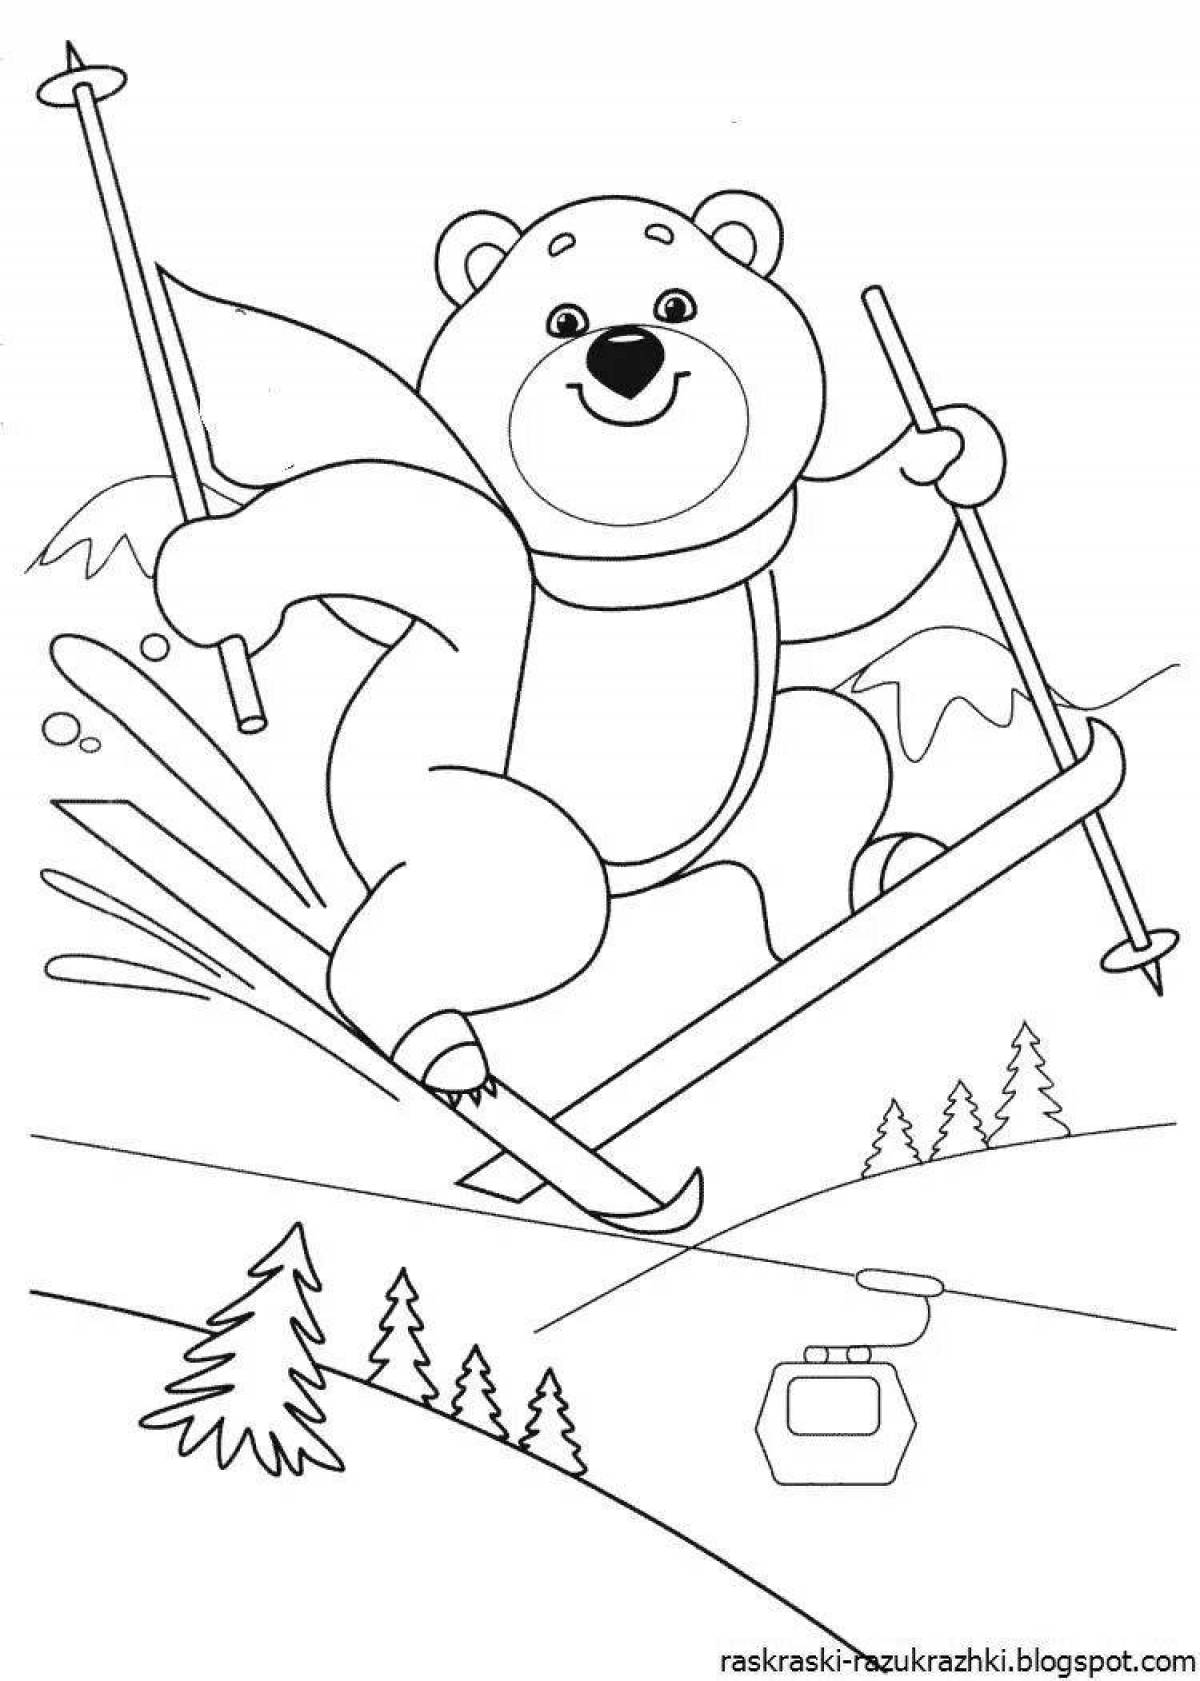 Amazing olympic bear coloring pages for kids